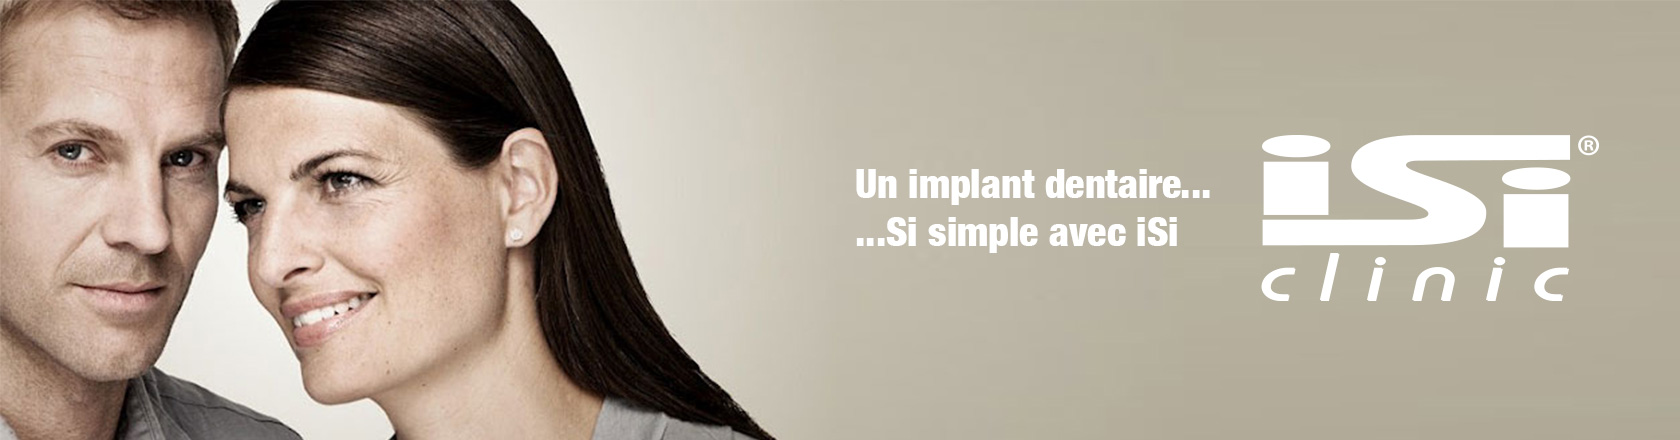 Questions implants dentaires